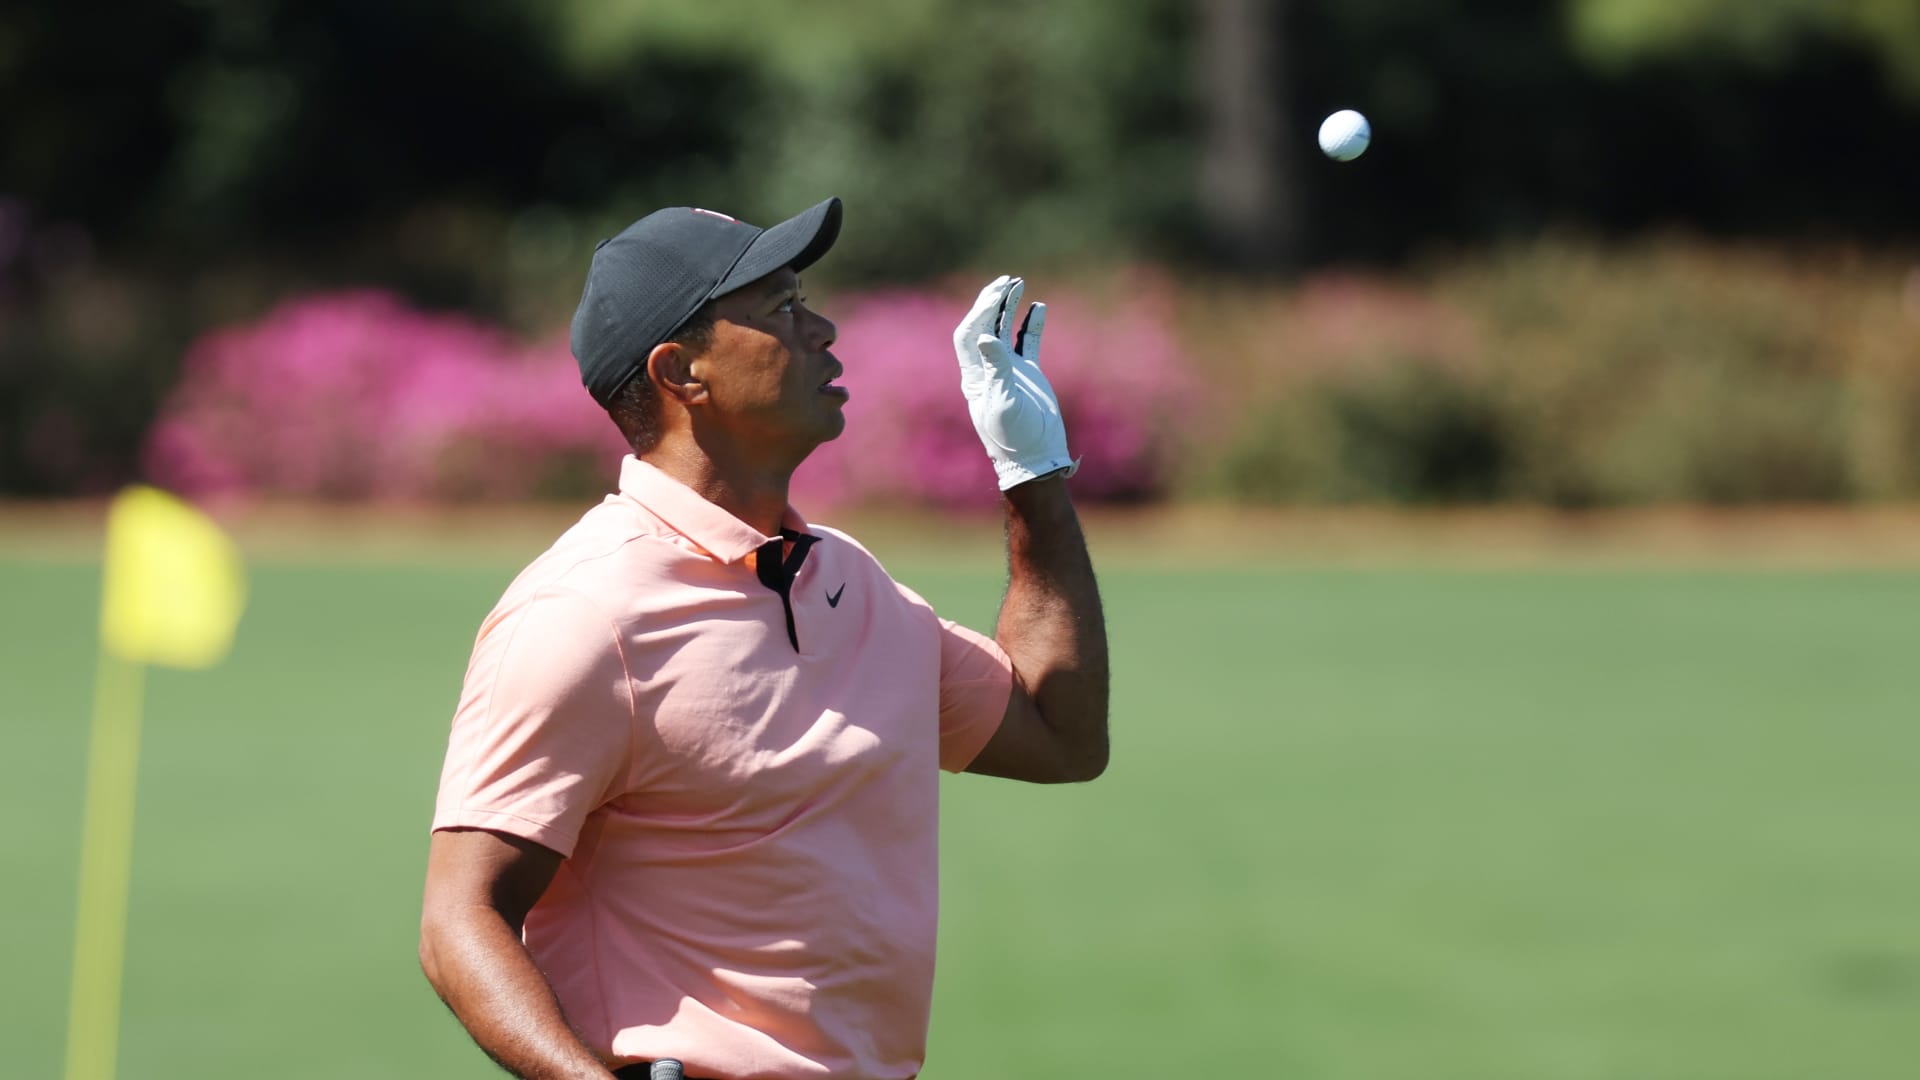 Tiger Woods of the United States warms up in the practice area prior to the Masters at Augusta National Golf Club on April 03, 2022 in Augusta, Georgia.